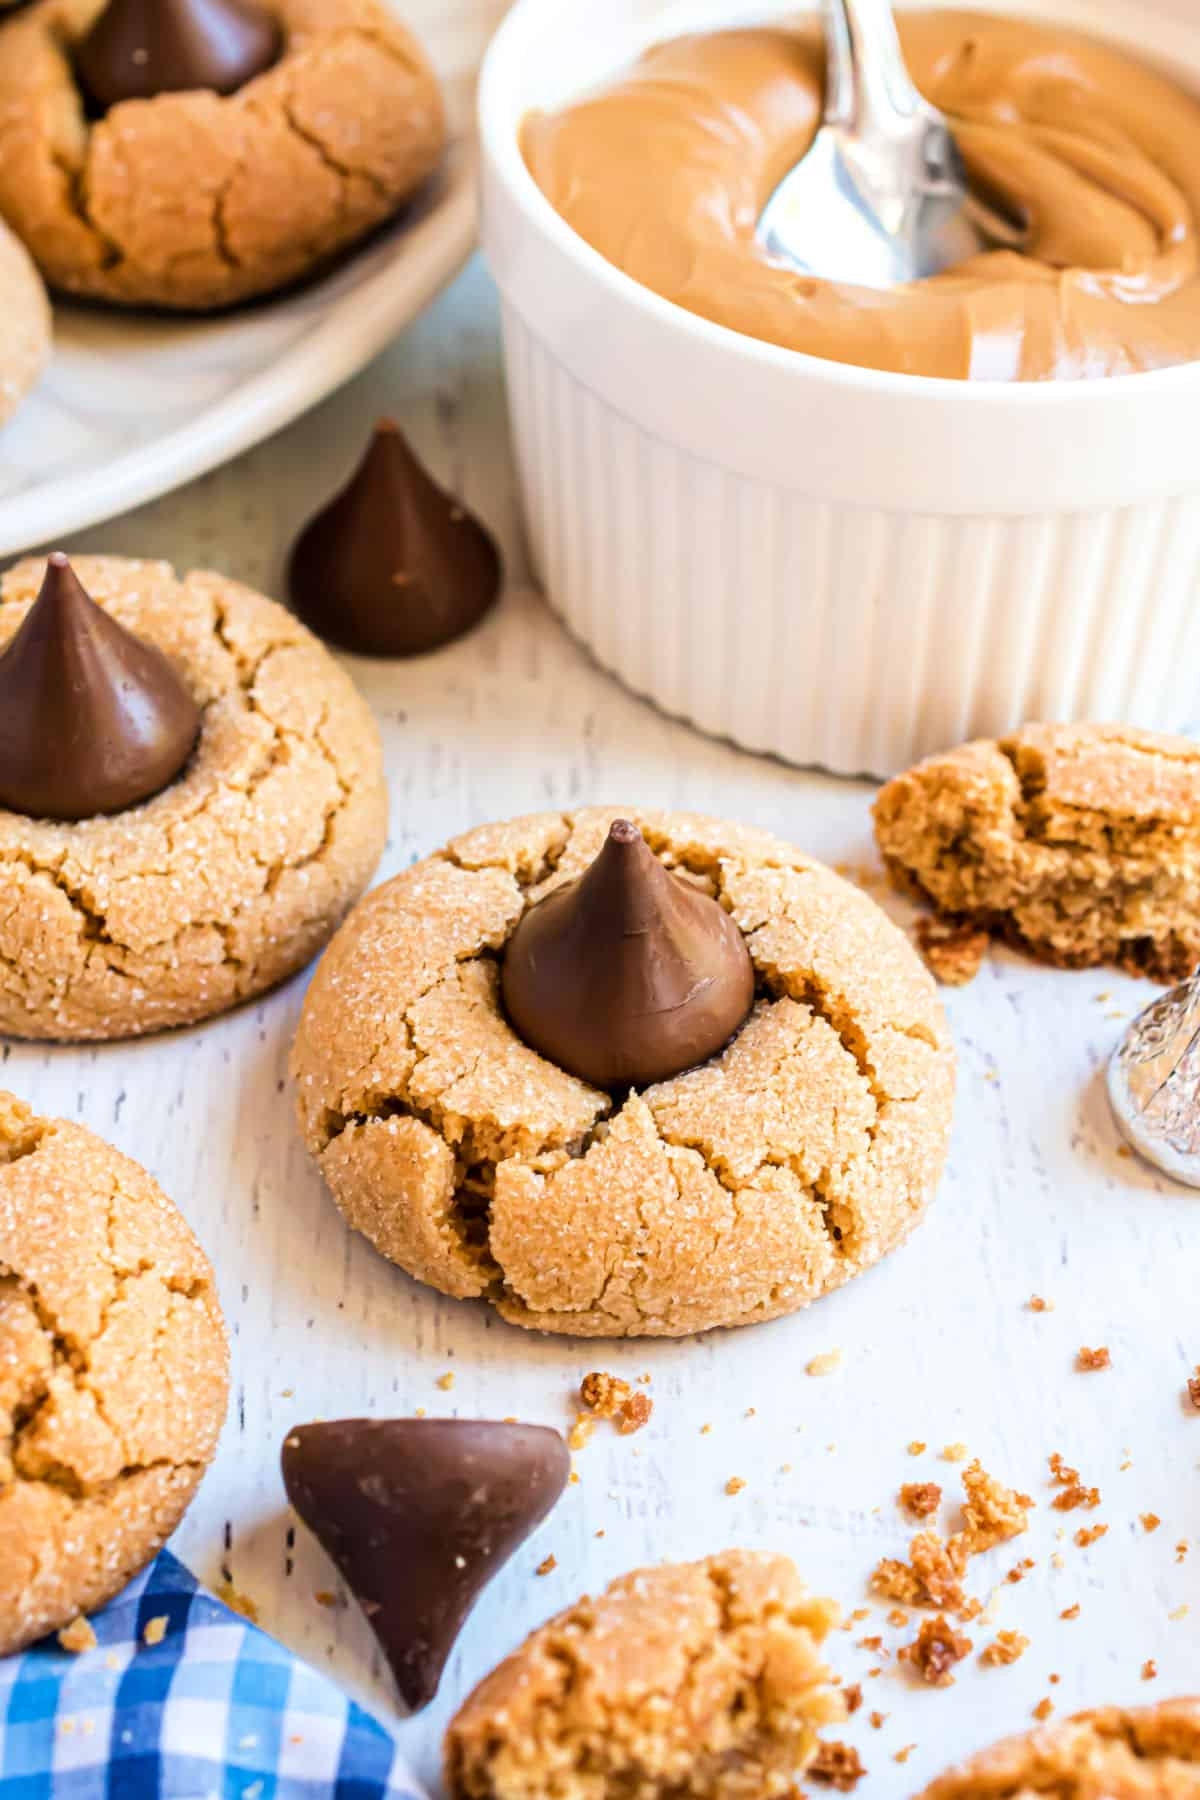 Peanut butter blossom cookies on counter.